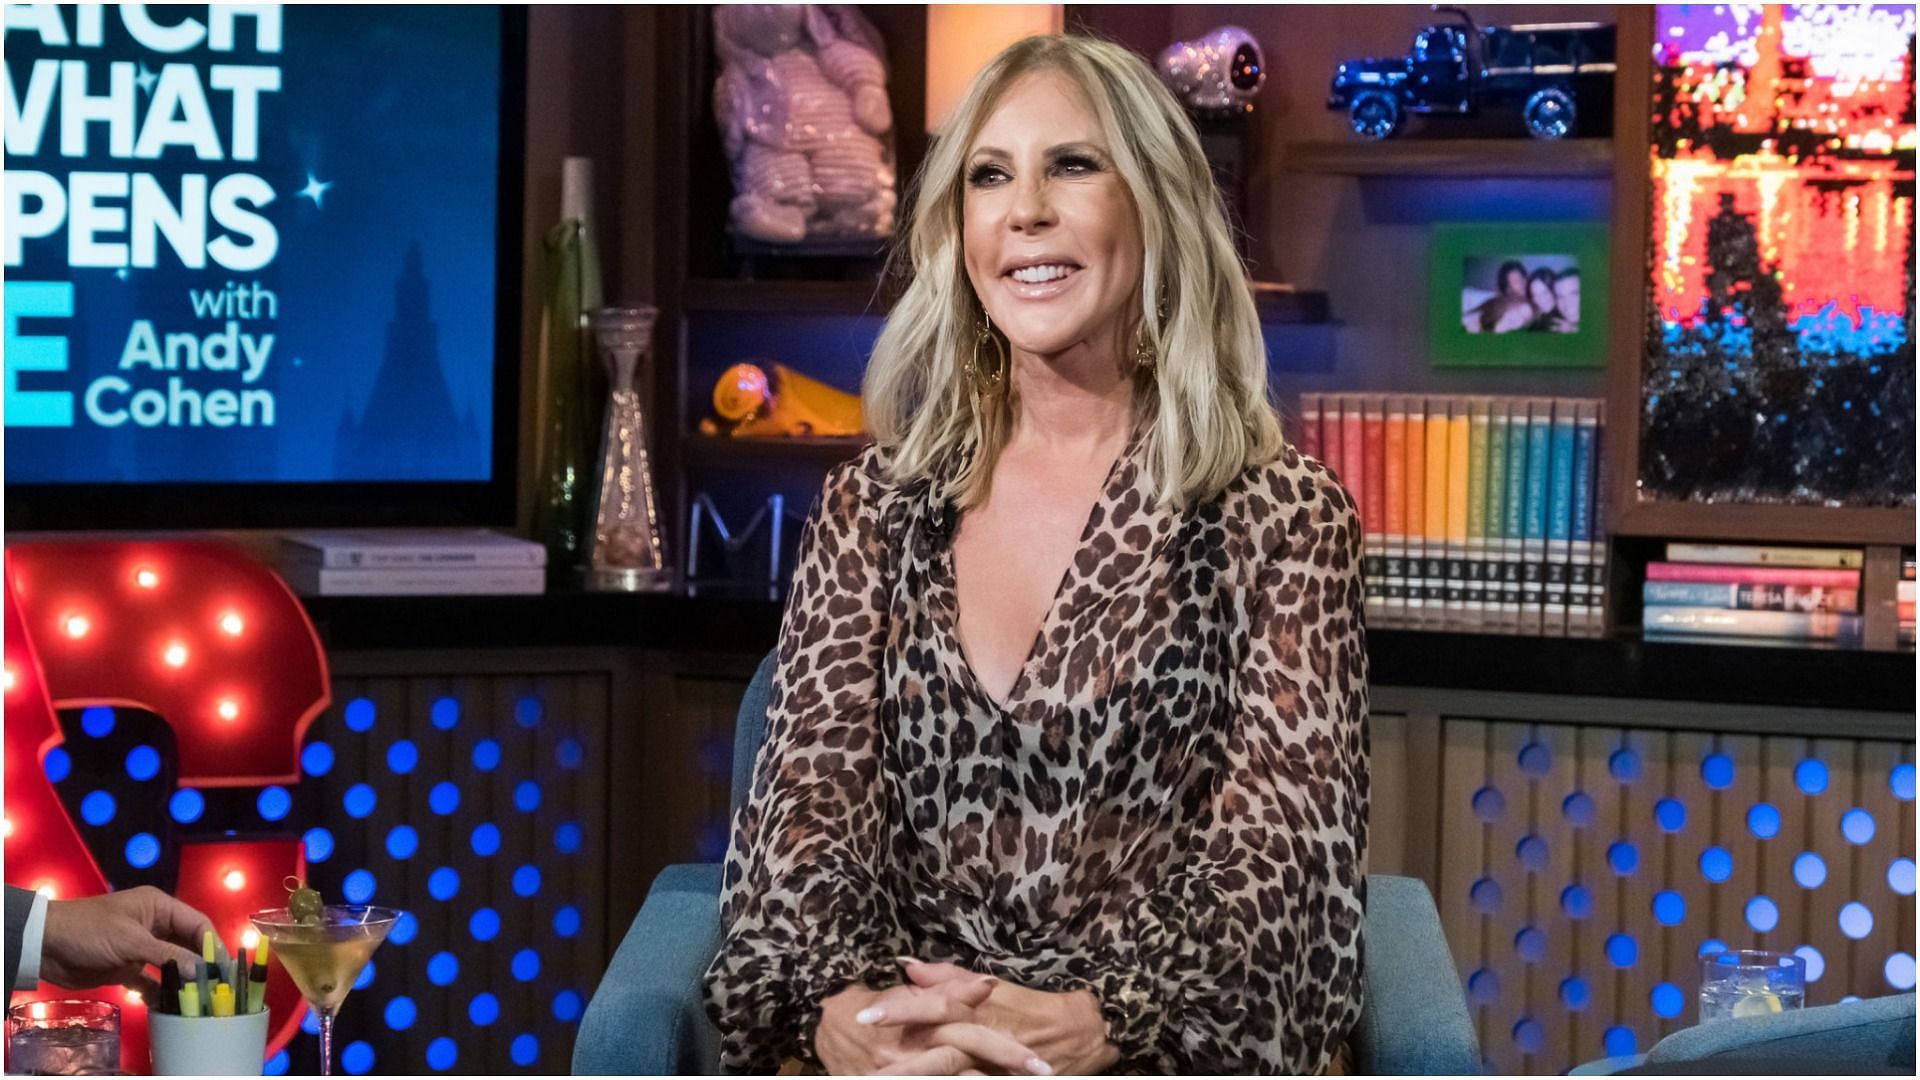 Vicki Gunvalson in Watch What Happens Live with Andy Cohen (Image by Charles Sykes/Bravo/NBCU Photo Bank/NBCUniversal by Getty Images)